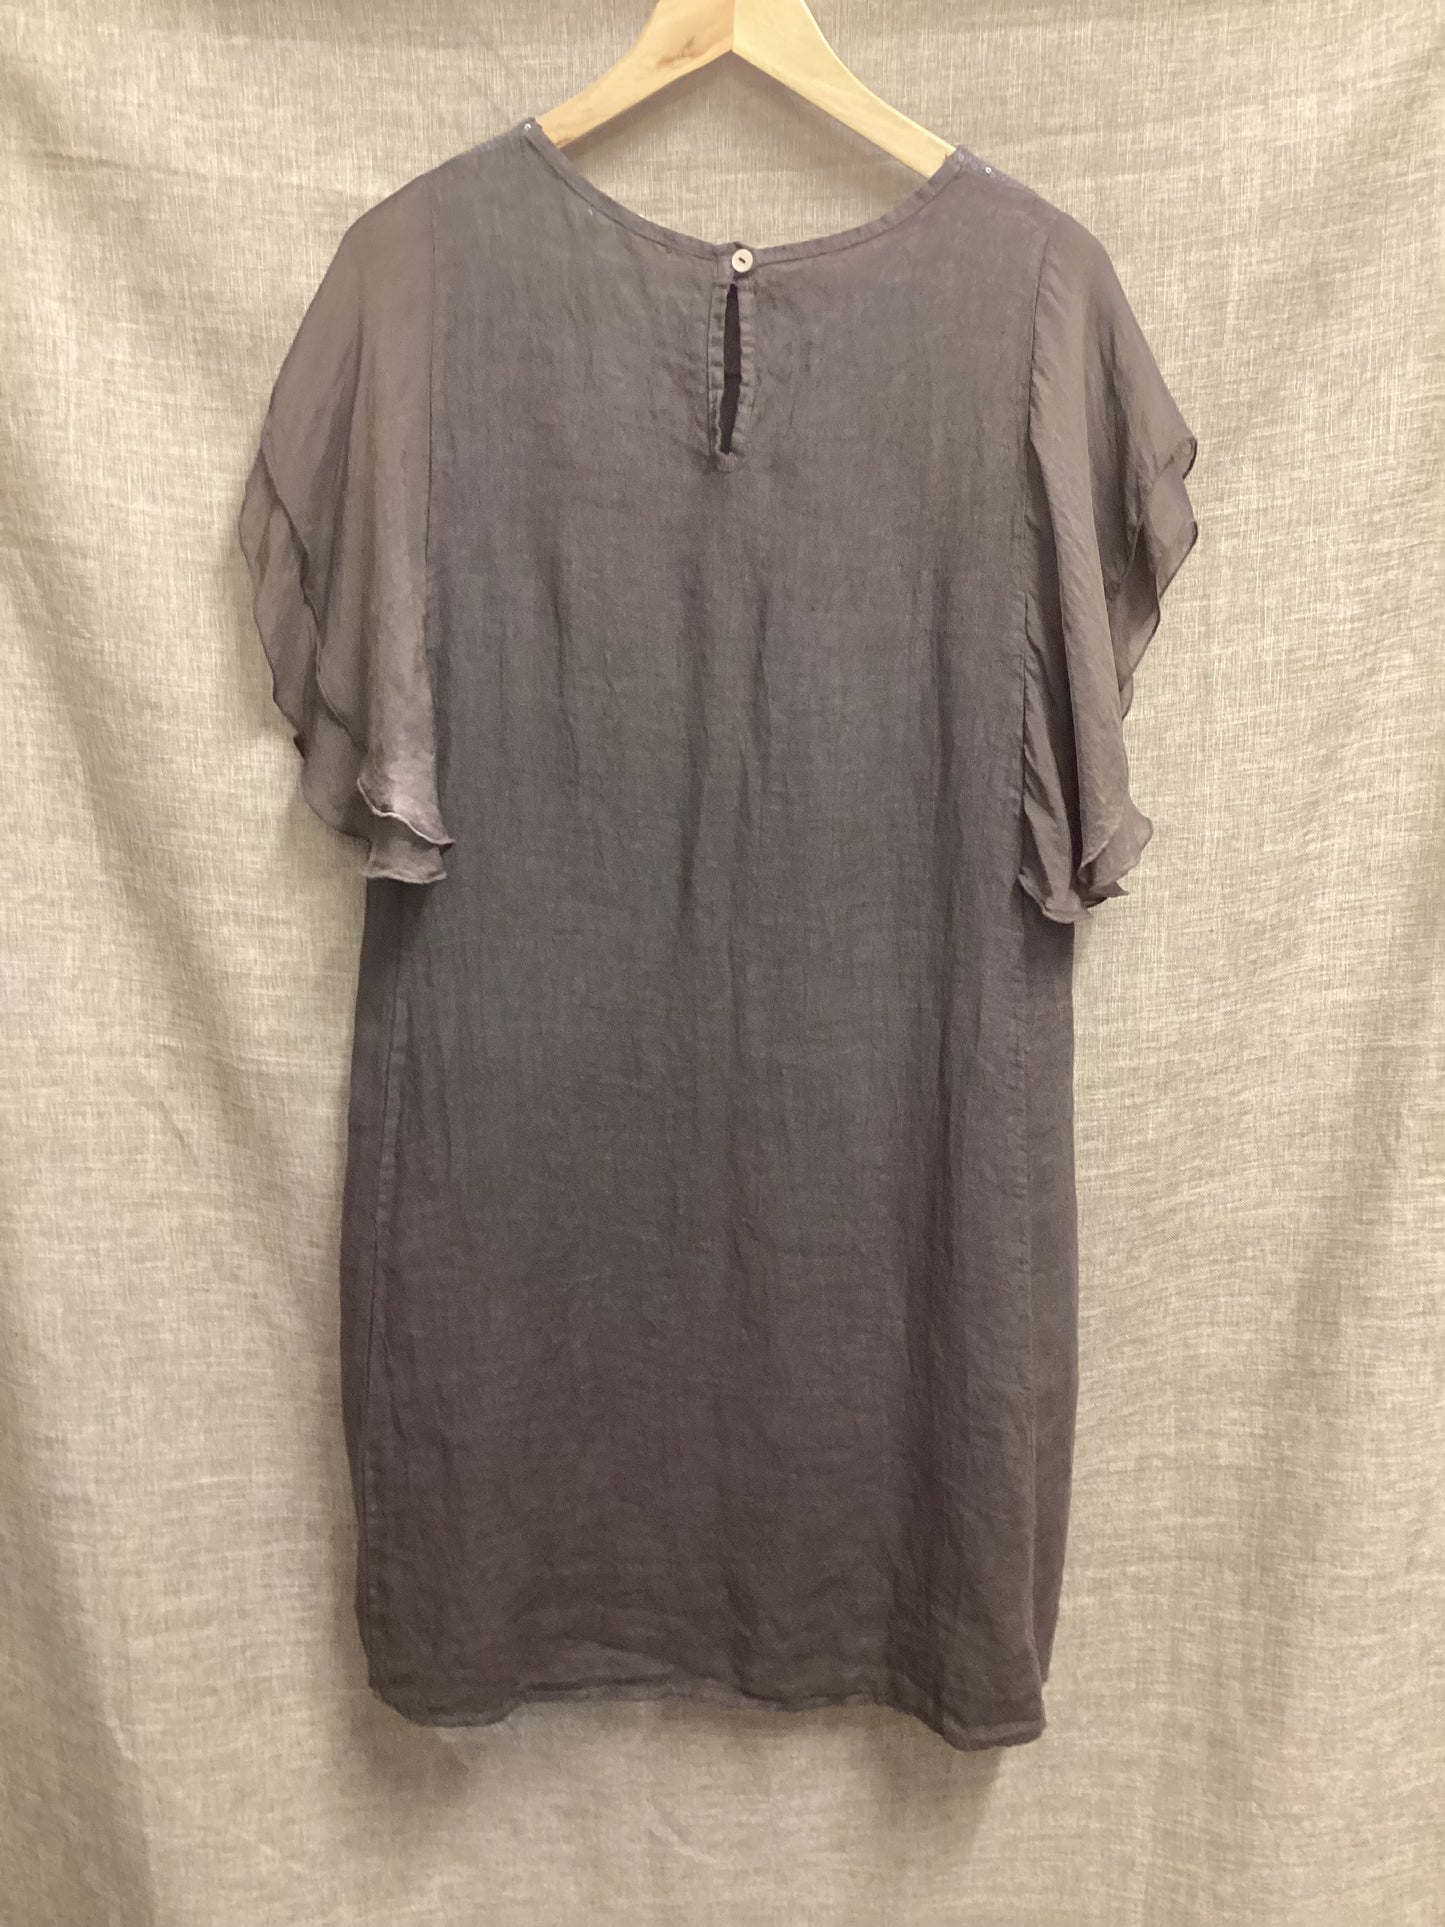 New with Tags Marissa & Marie Brown Linen Beach Cover Up Dress Small